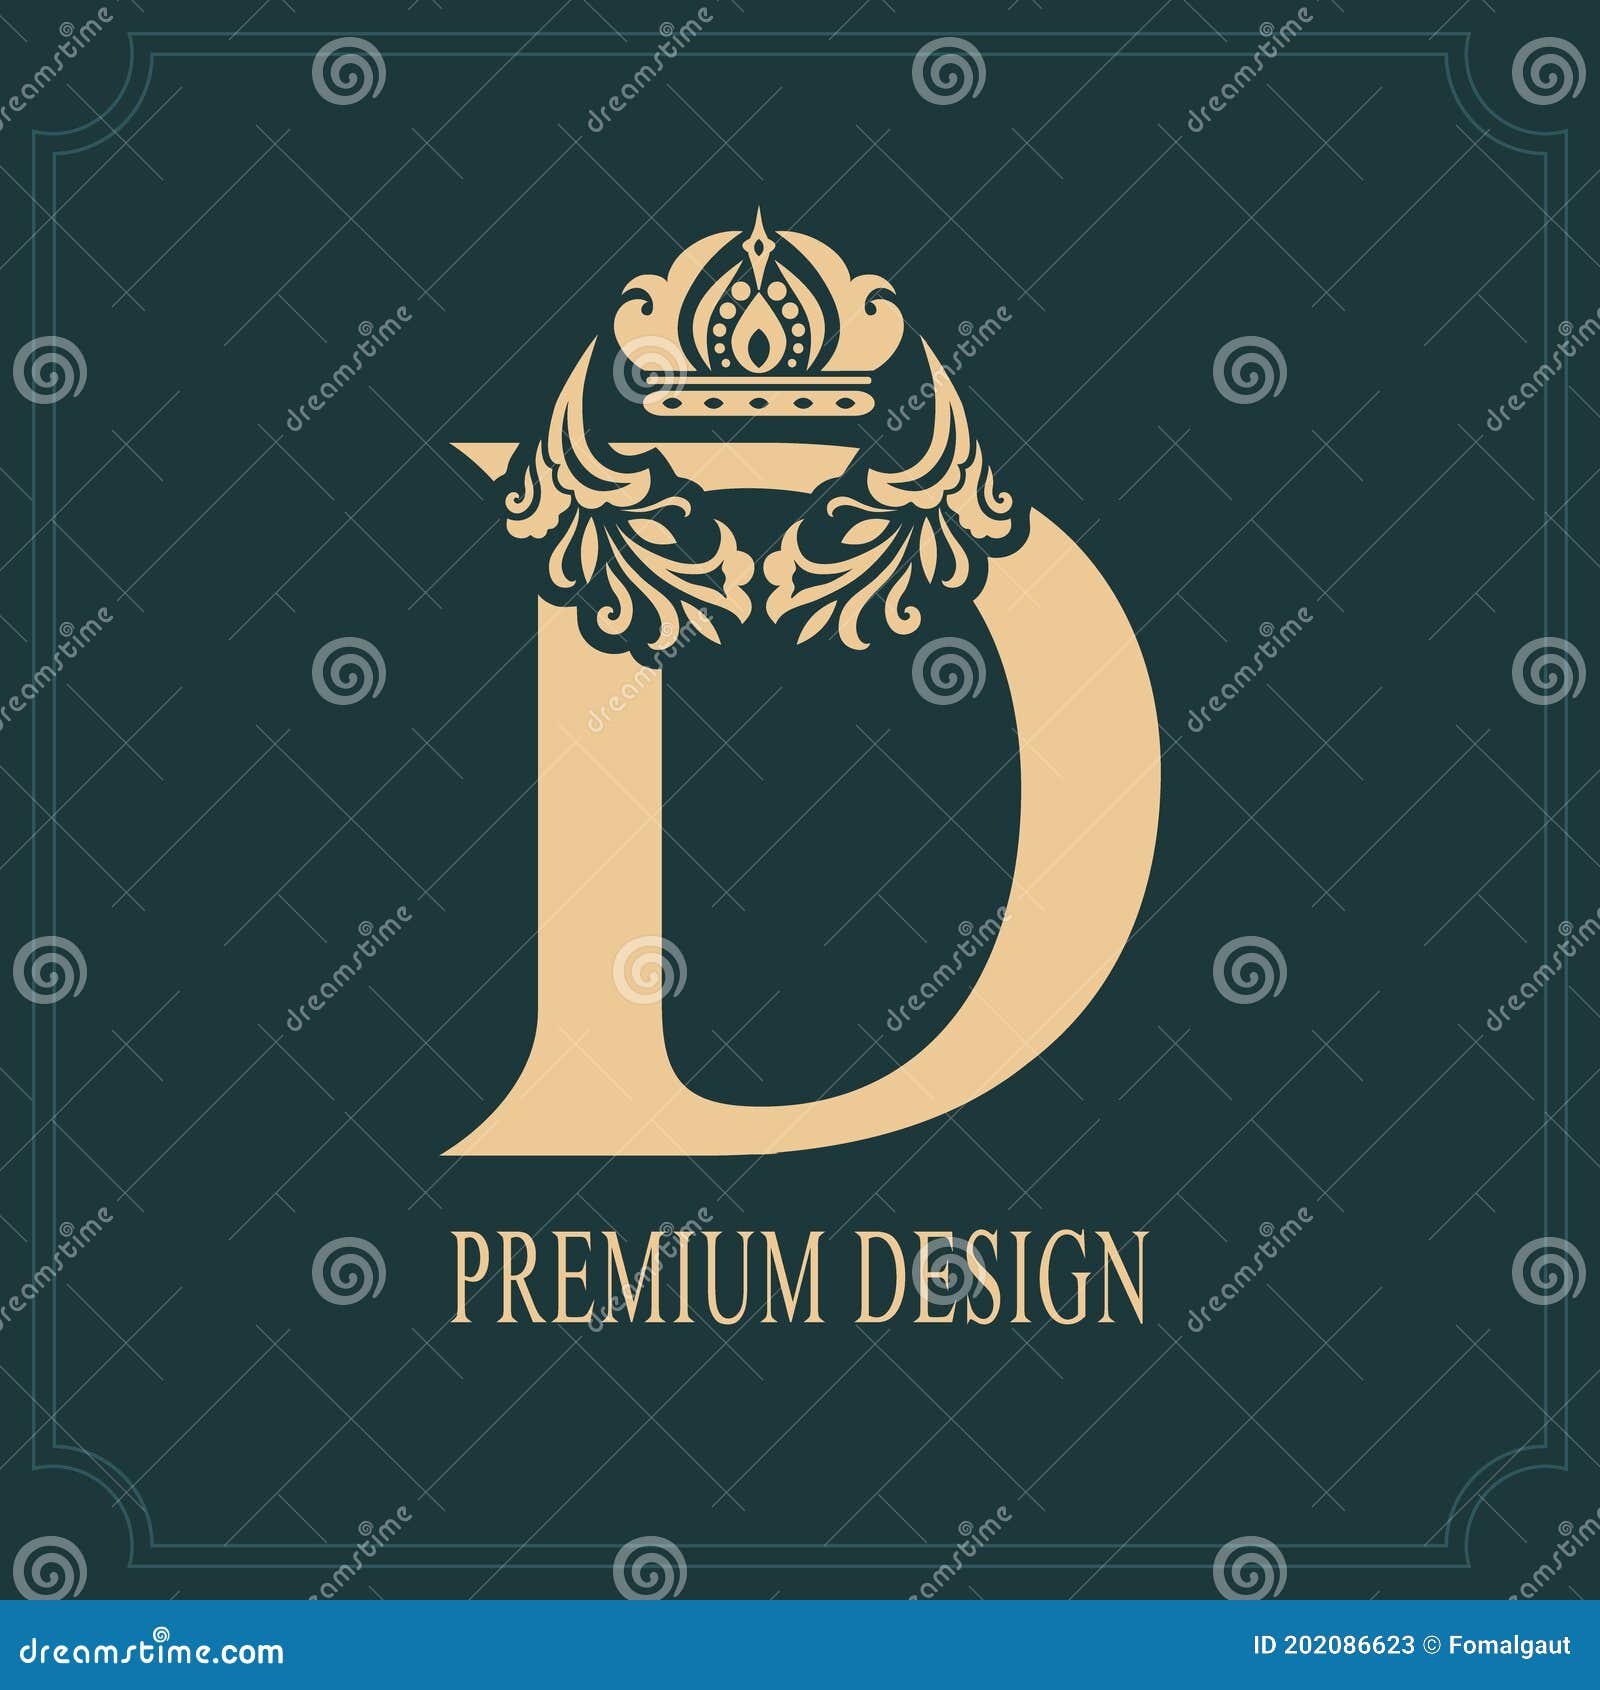 W Letter Logo Consisting Of Floral Pattern Letters In A Heraldic Shield  With Crown Stock Illustration - Download Image Now - iStock